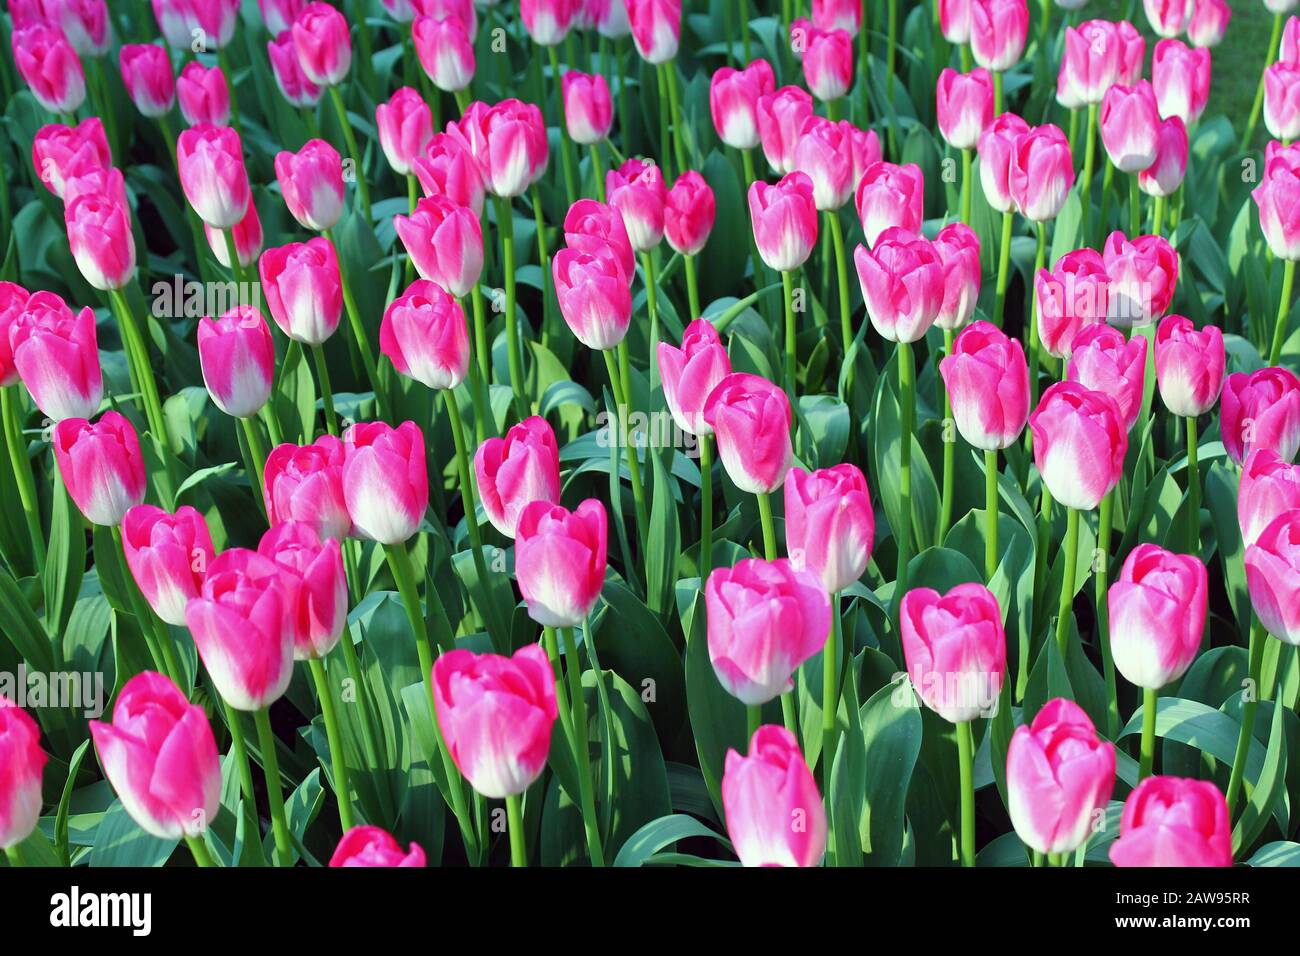 Endless pink and white tulips in Europe Stock Photo